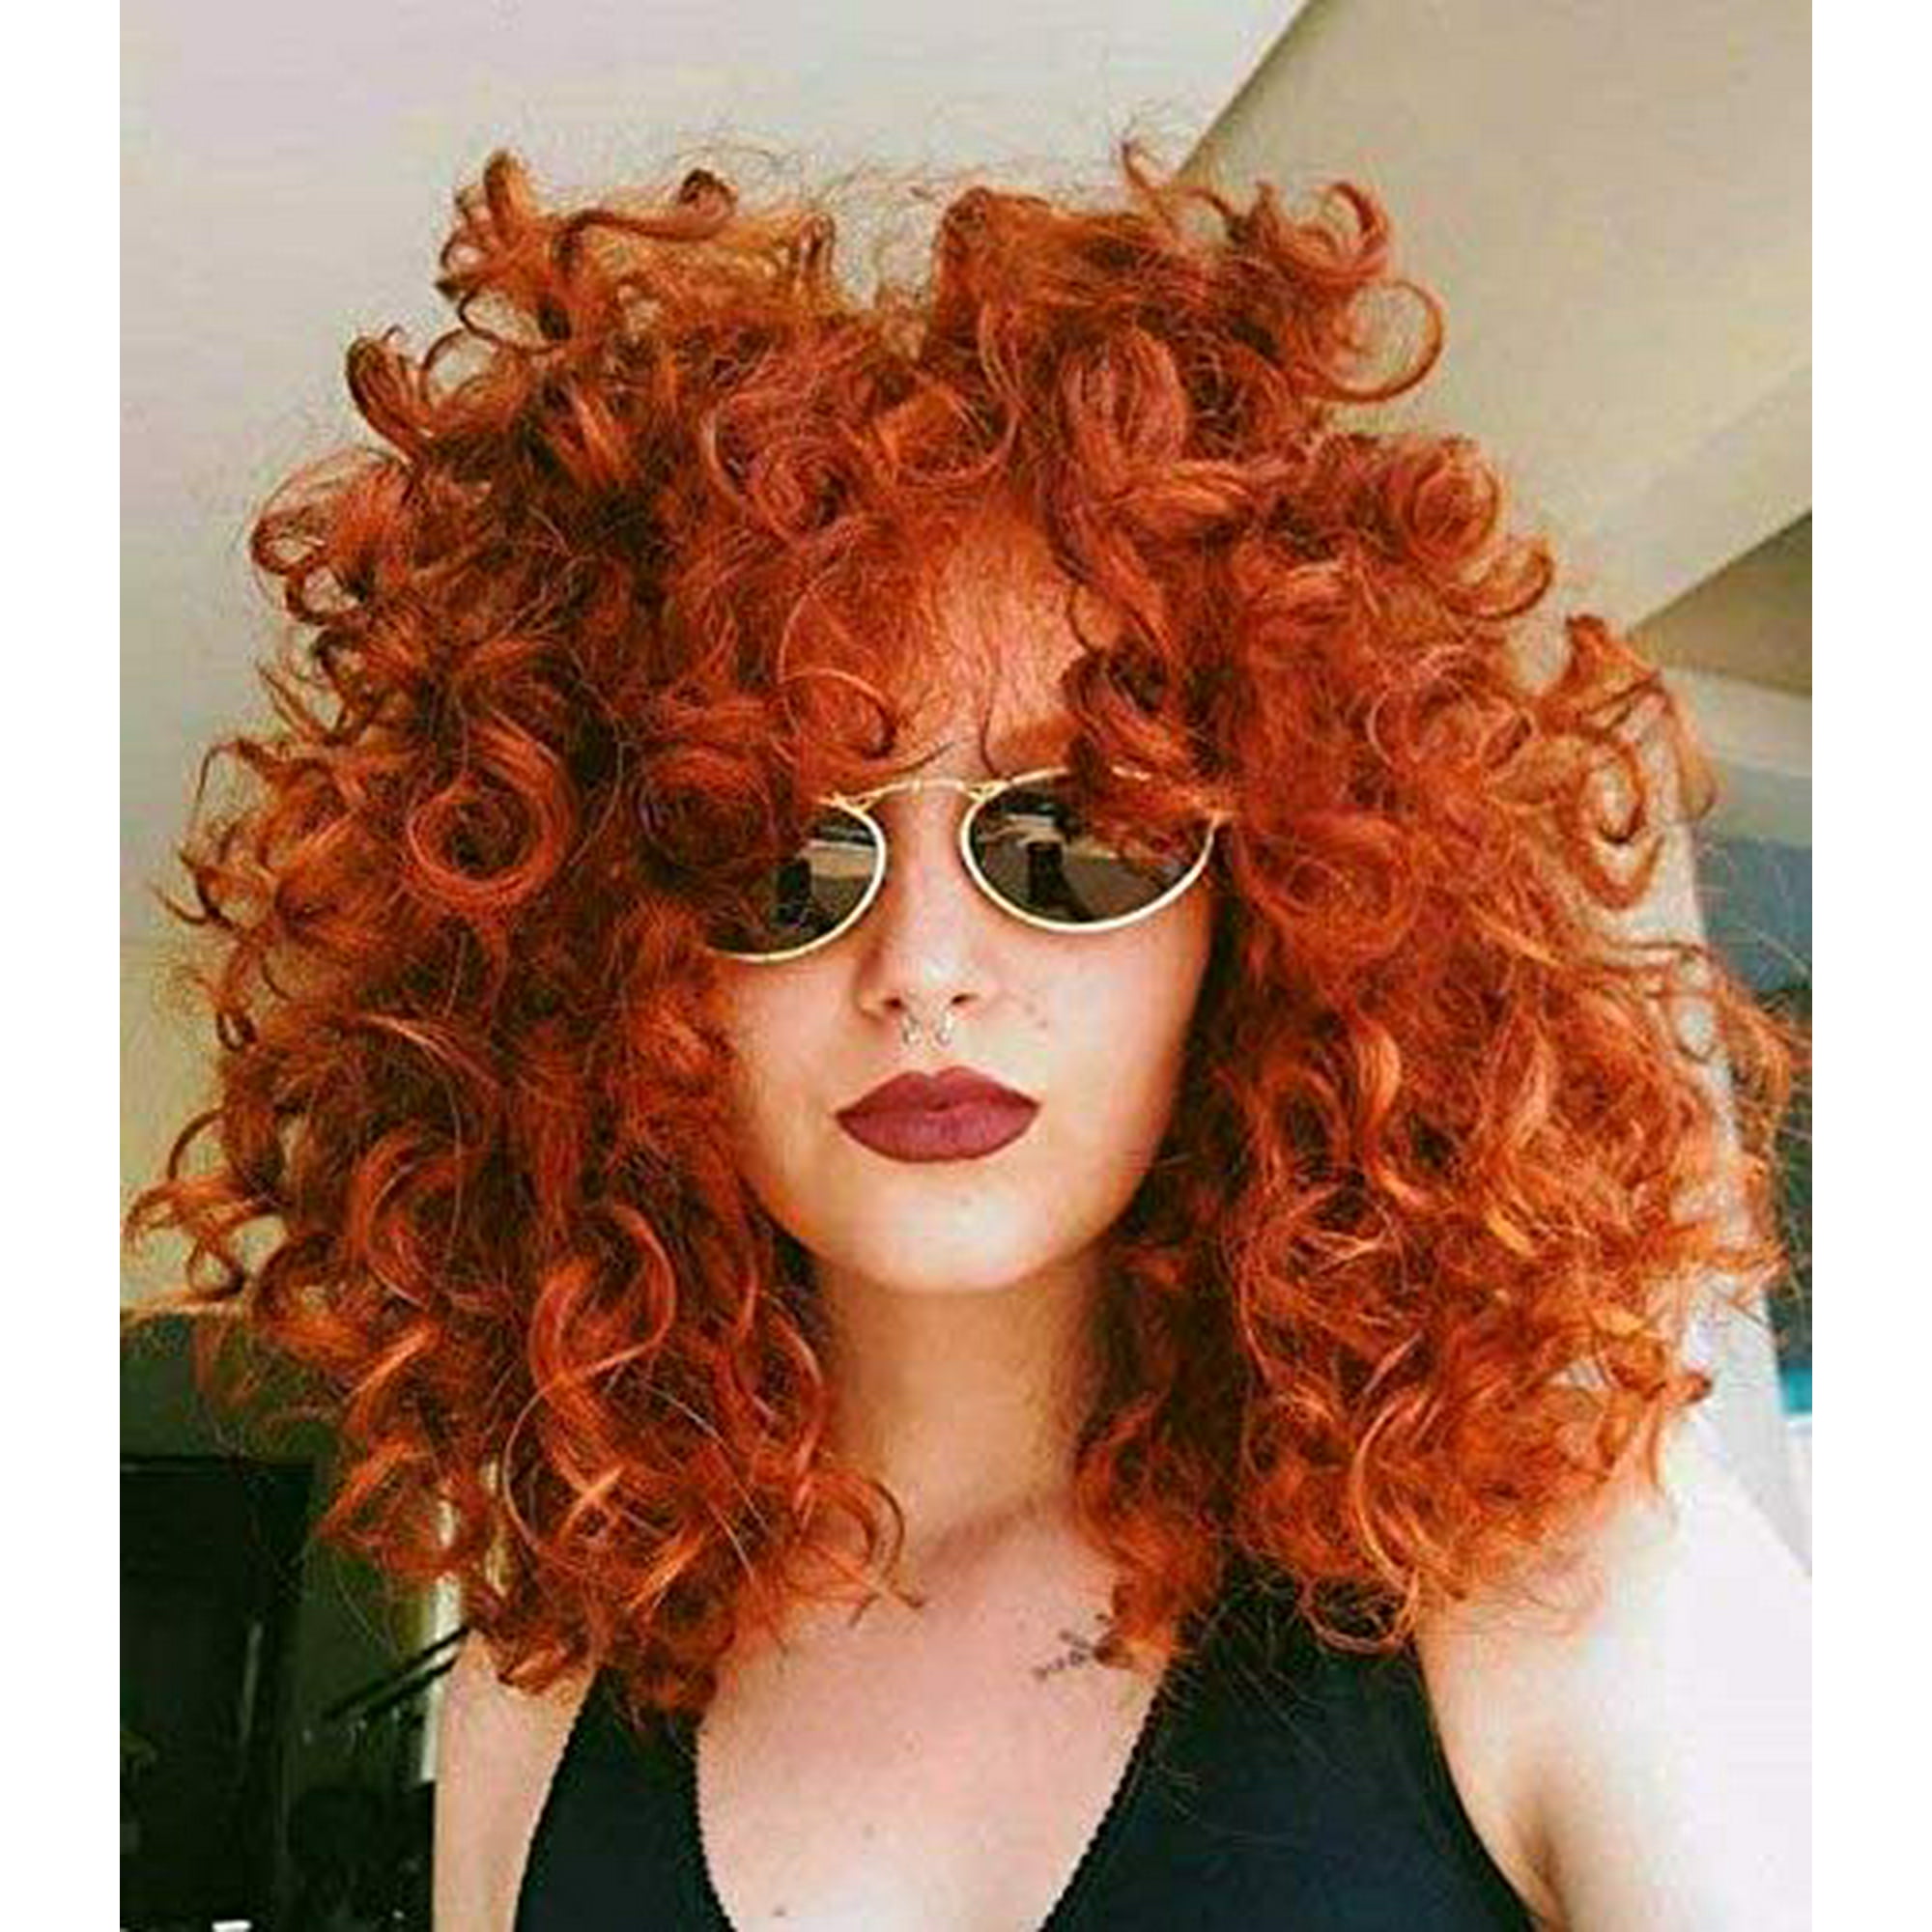 Brown Curly Human Hair Wigs Human Hair Curly Wigs Fine Lace Wigs | Women  Brown Middle Length Wig Bob Style Curly Wavy Hair Full Wigs 